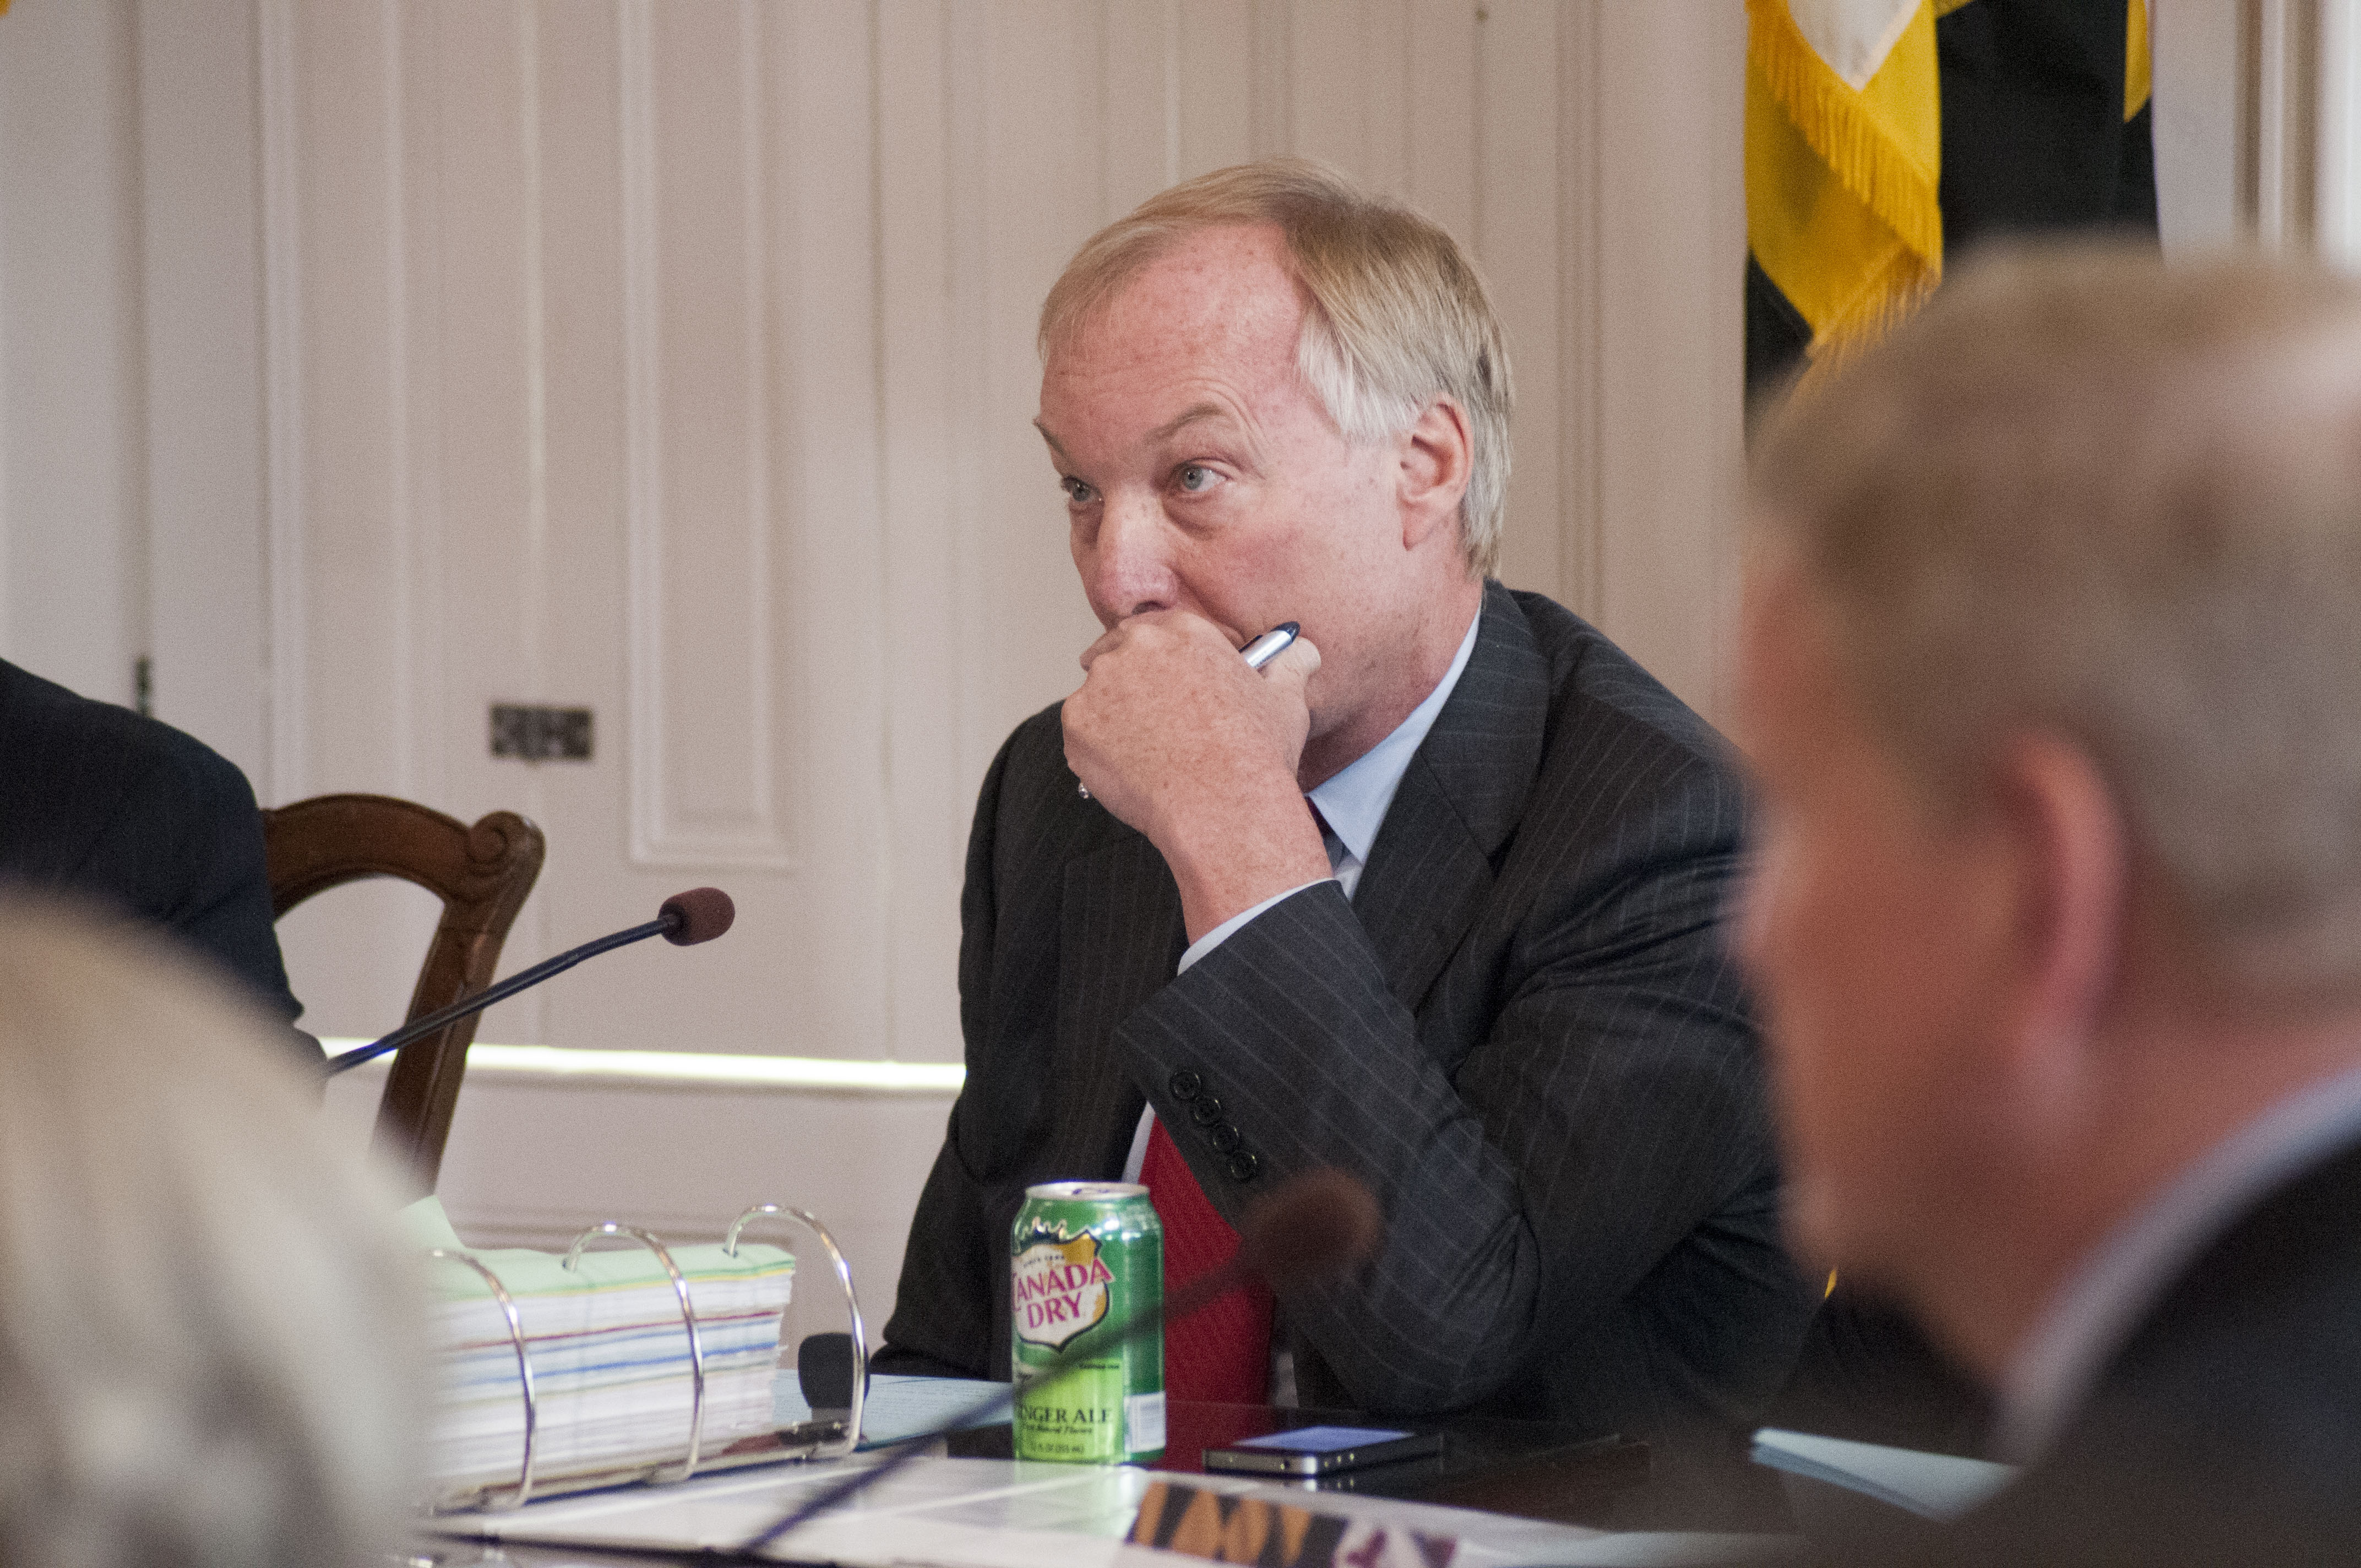 Franchot says stimulus funds are ‘very critical’ for Maryland to have a balanced budget